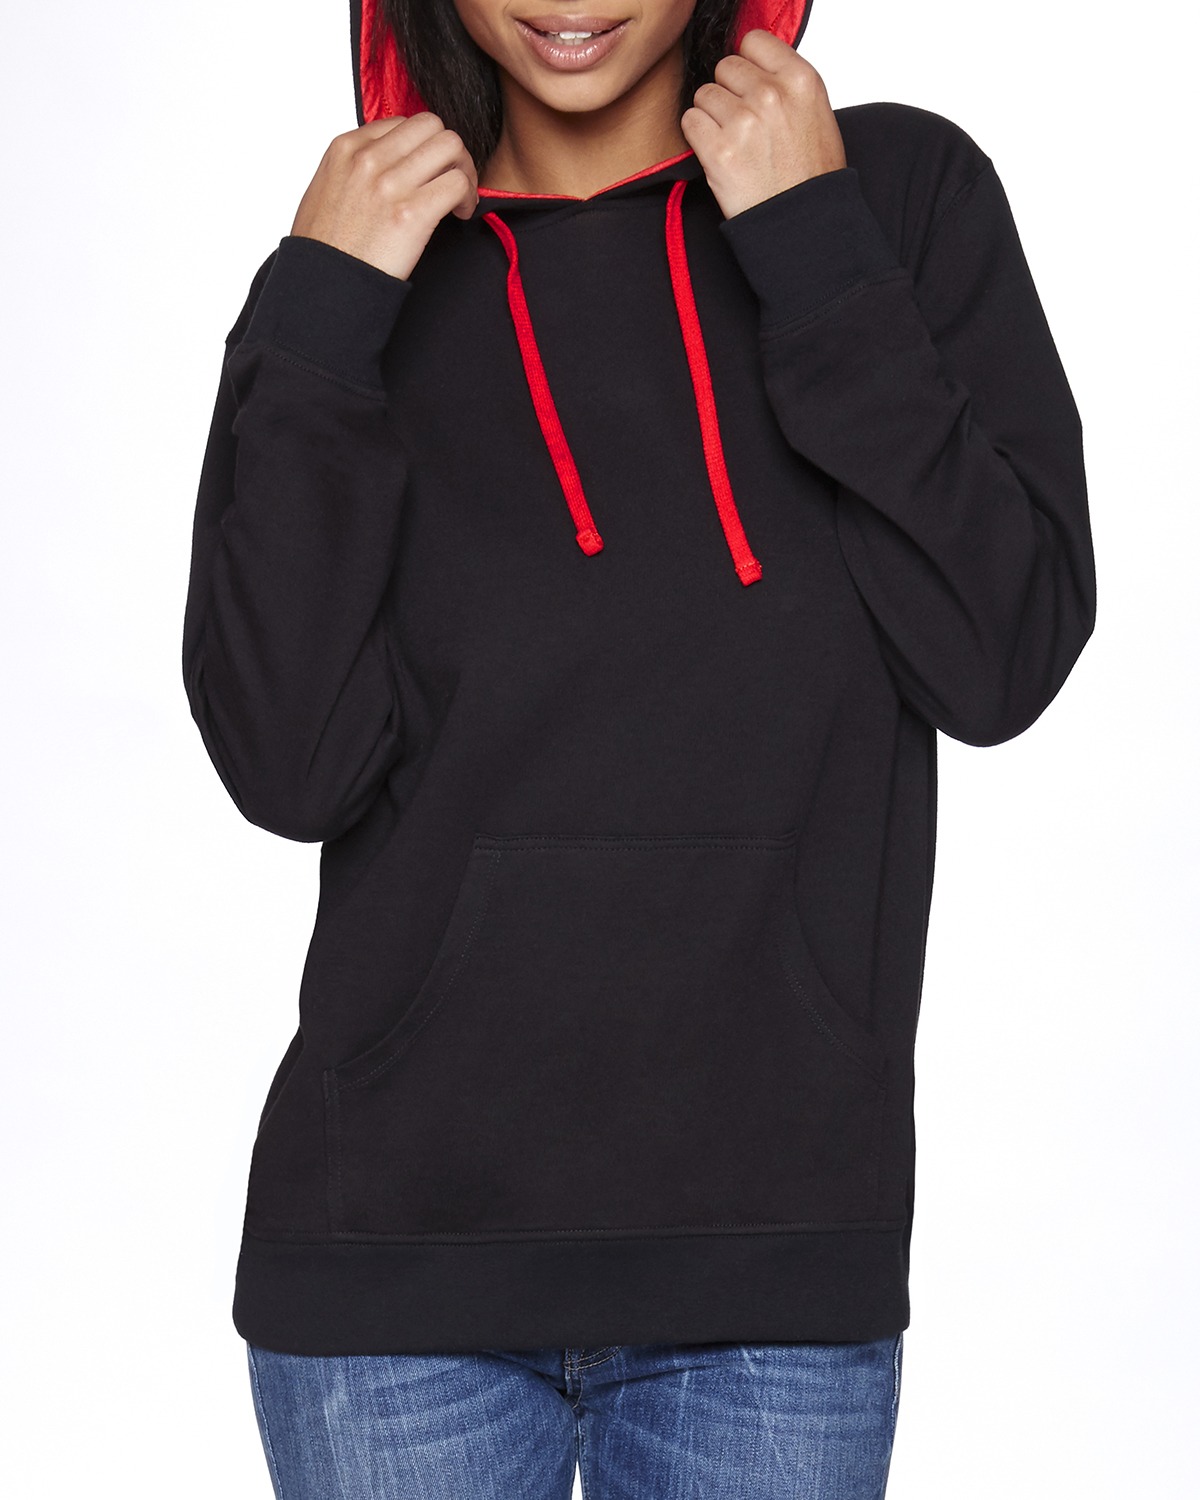 Next Level French Terry Hooded Pullover